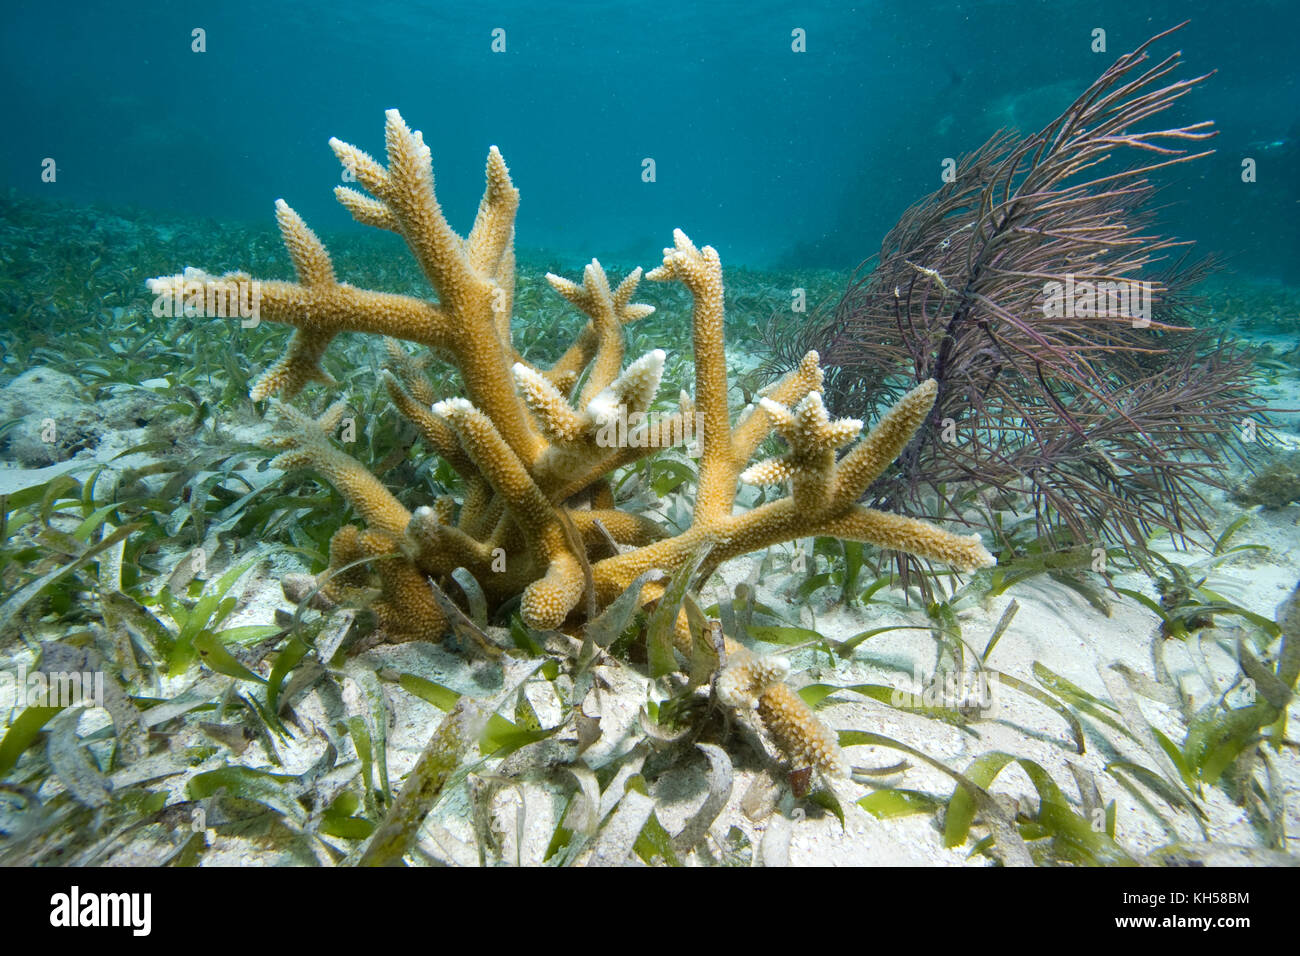 Staghorn coral,a Critically Endangered species, Acropora cervicornis, Stock Photo